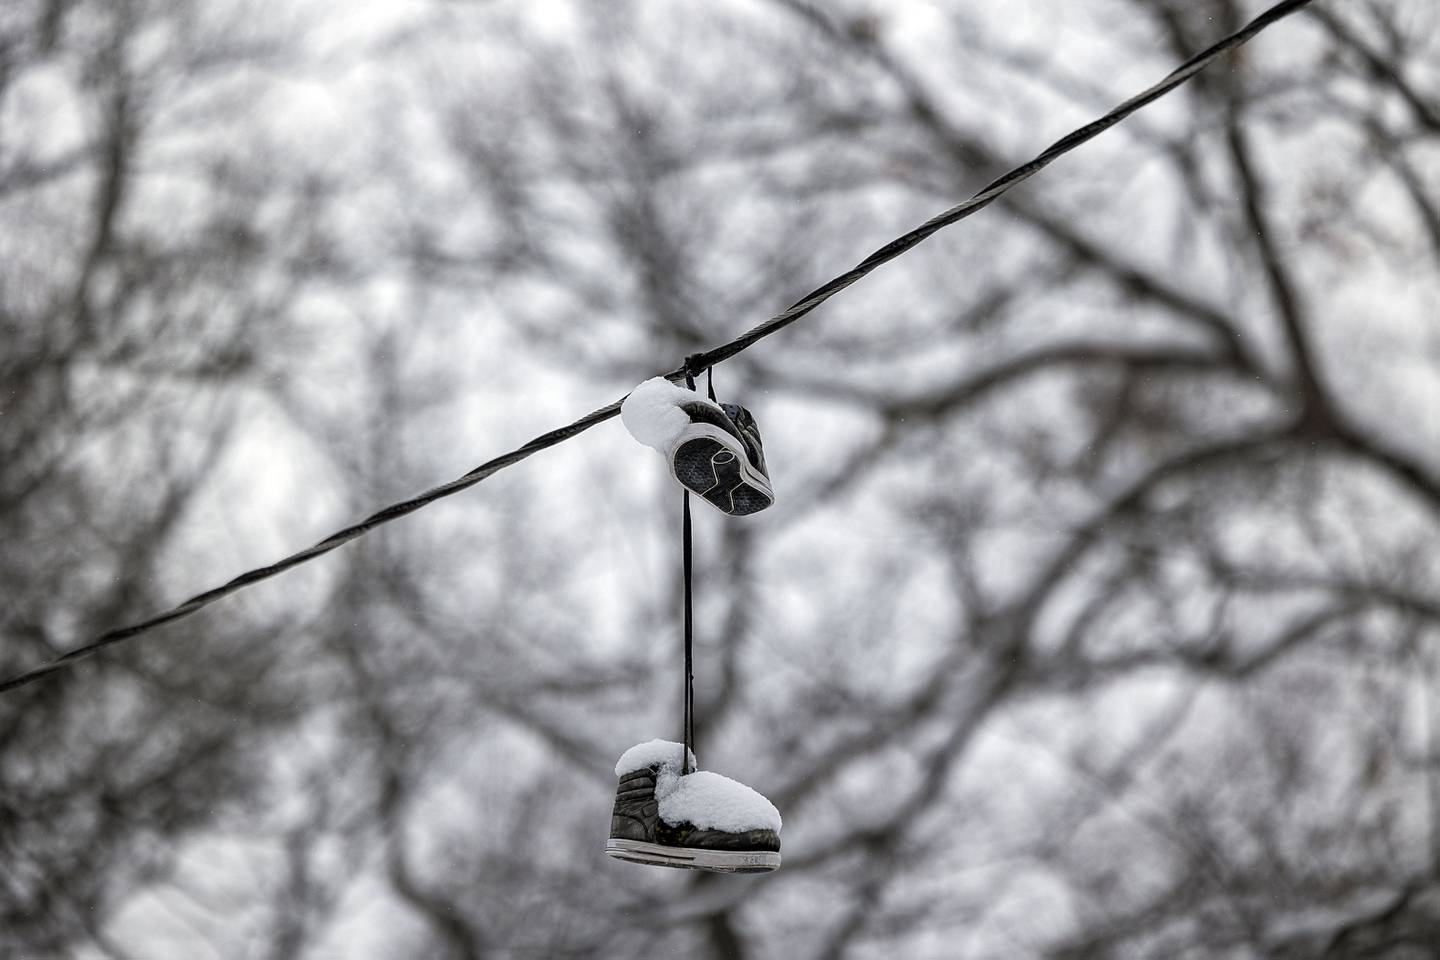 A pair of snow covered shoes hang from a wire in Sinnissippi Park in Sterling, Wednesday, Jan. 25, 2023.